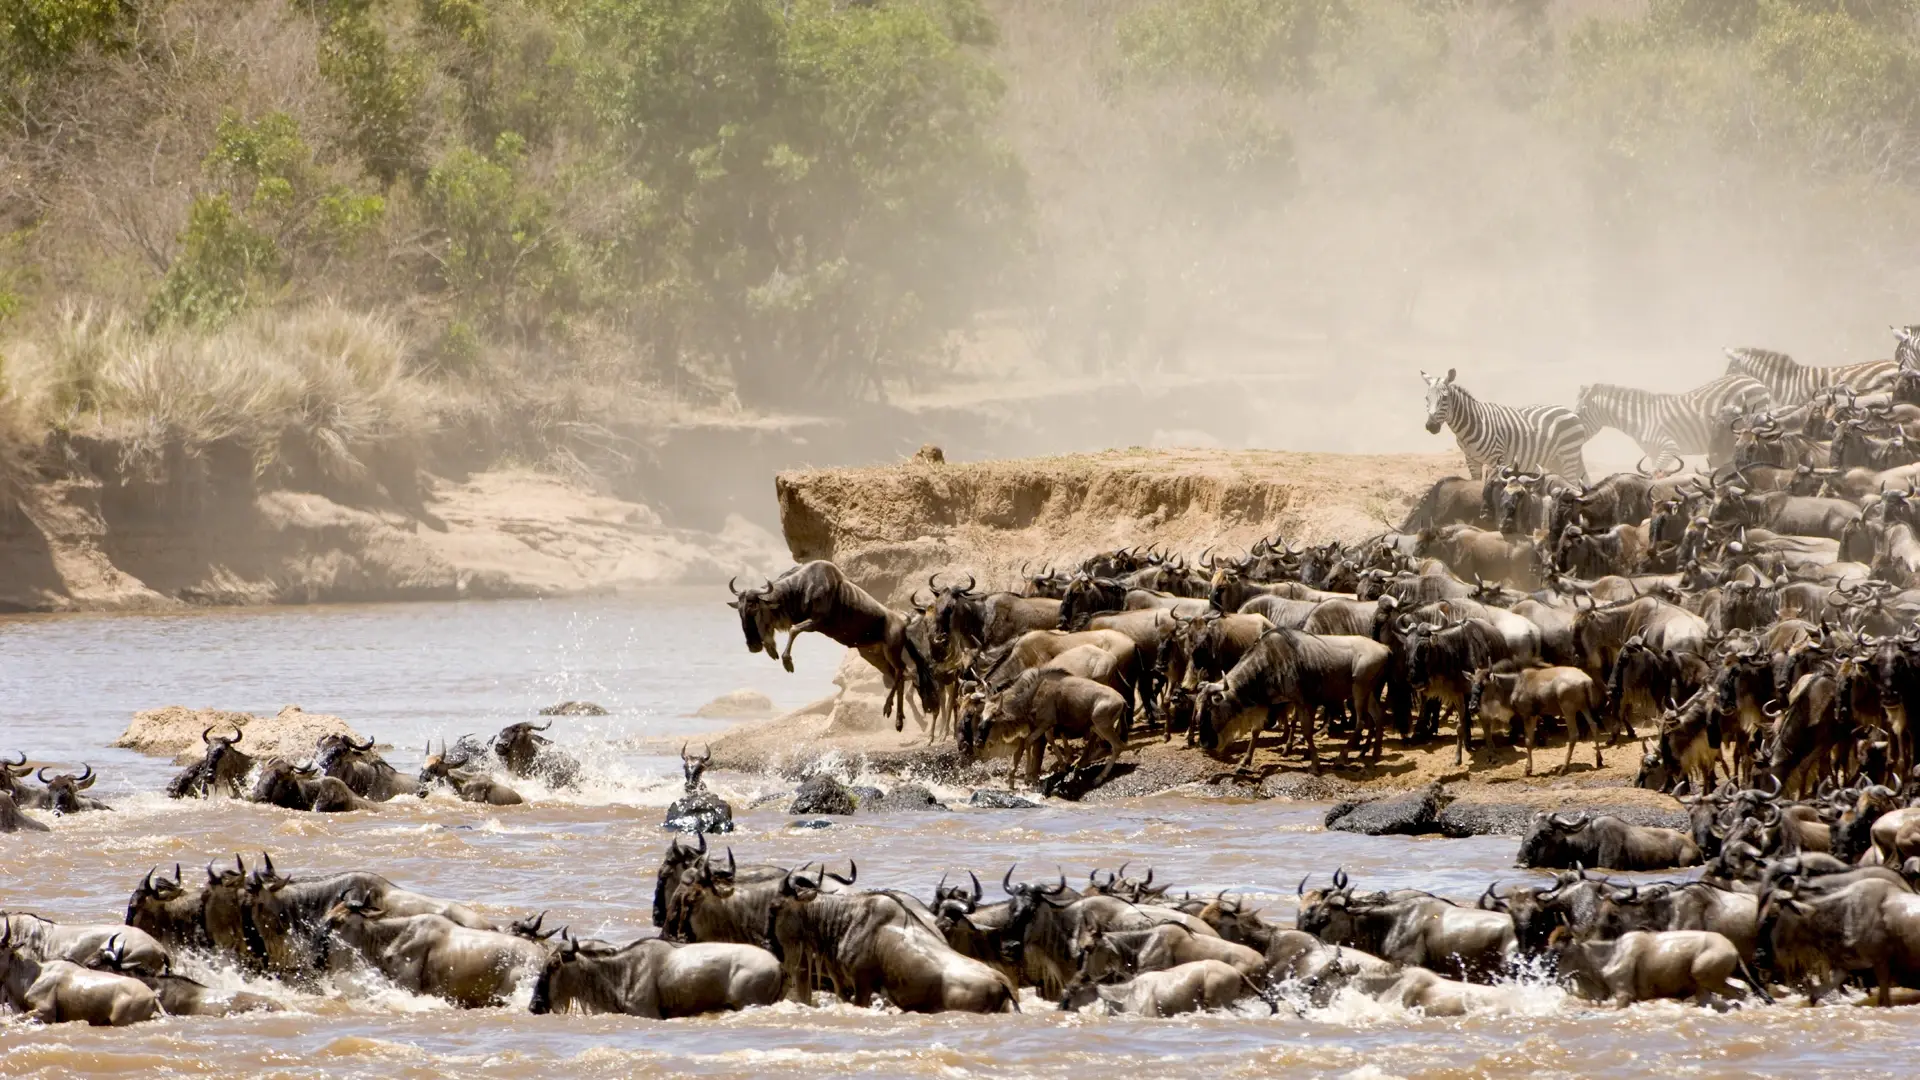 A breathtaking sight of the Great Migration river crossing during a game drive at One Nature Mara River.